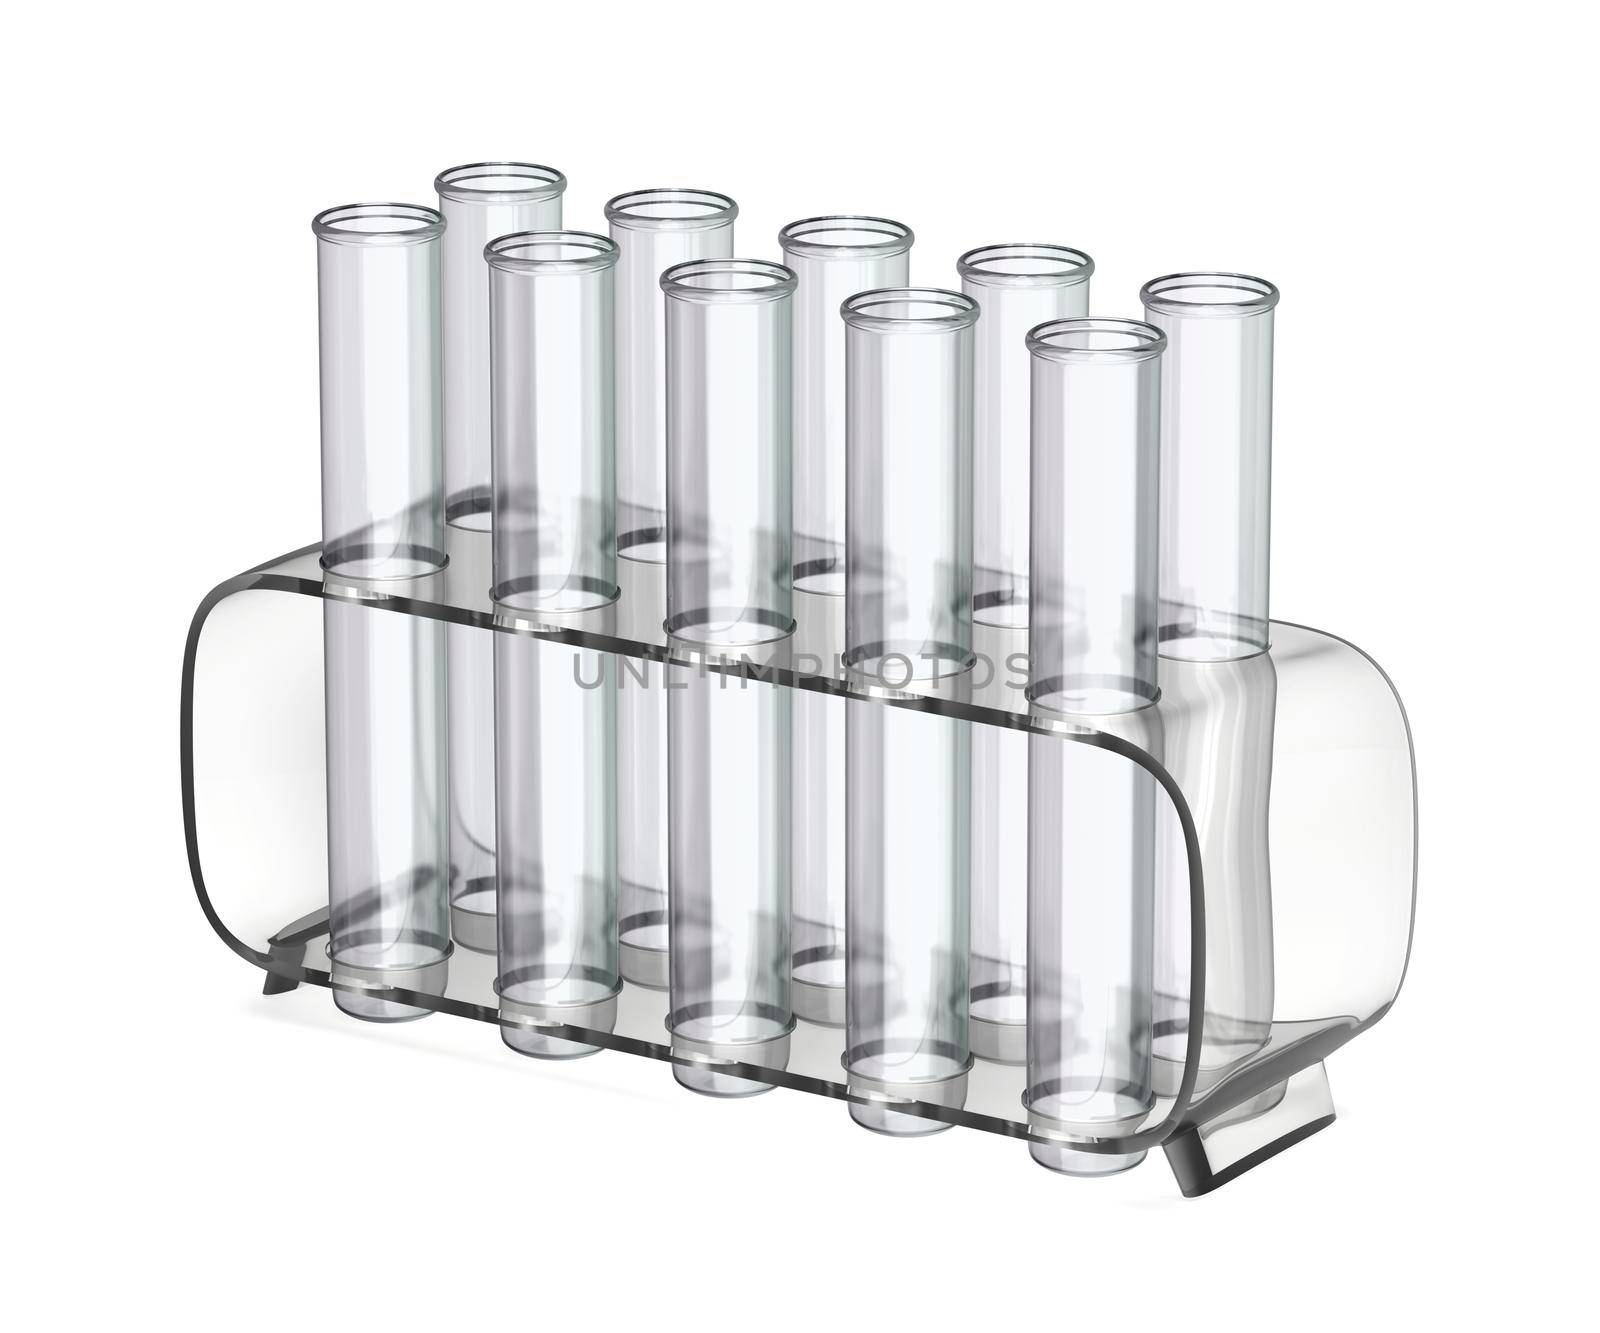 Empty test tubes in a rack on white background